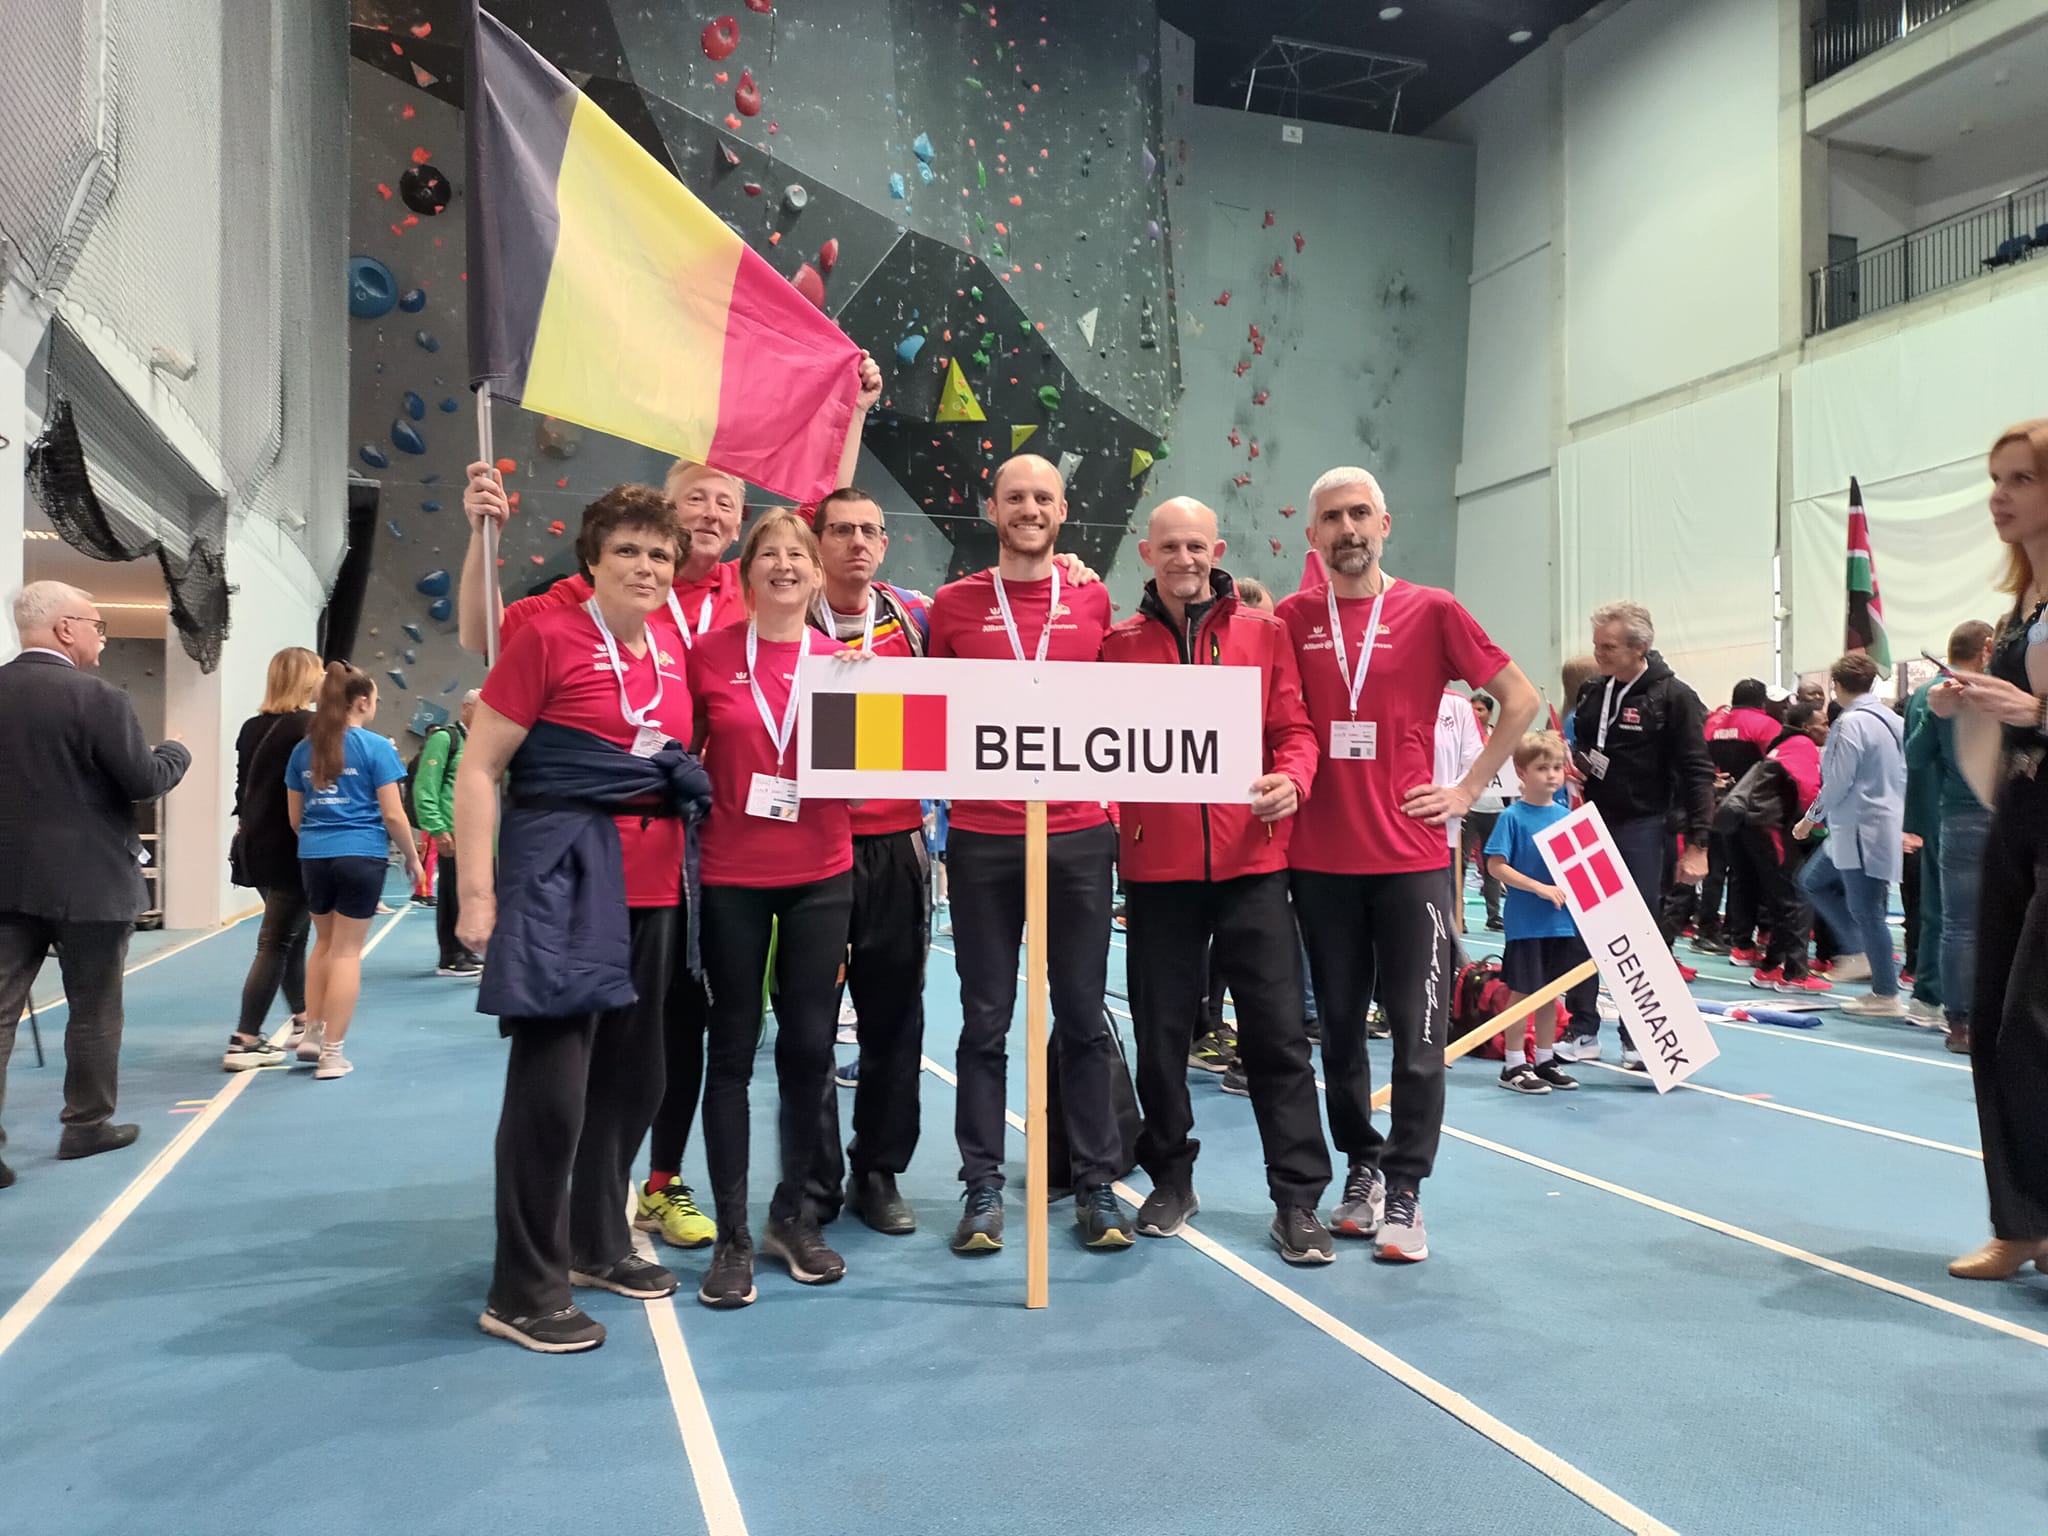 Team Belgium ready for Opening Ceremony. Photo by Sandy Triolo.